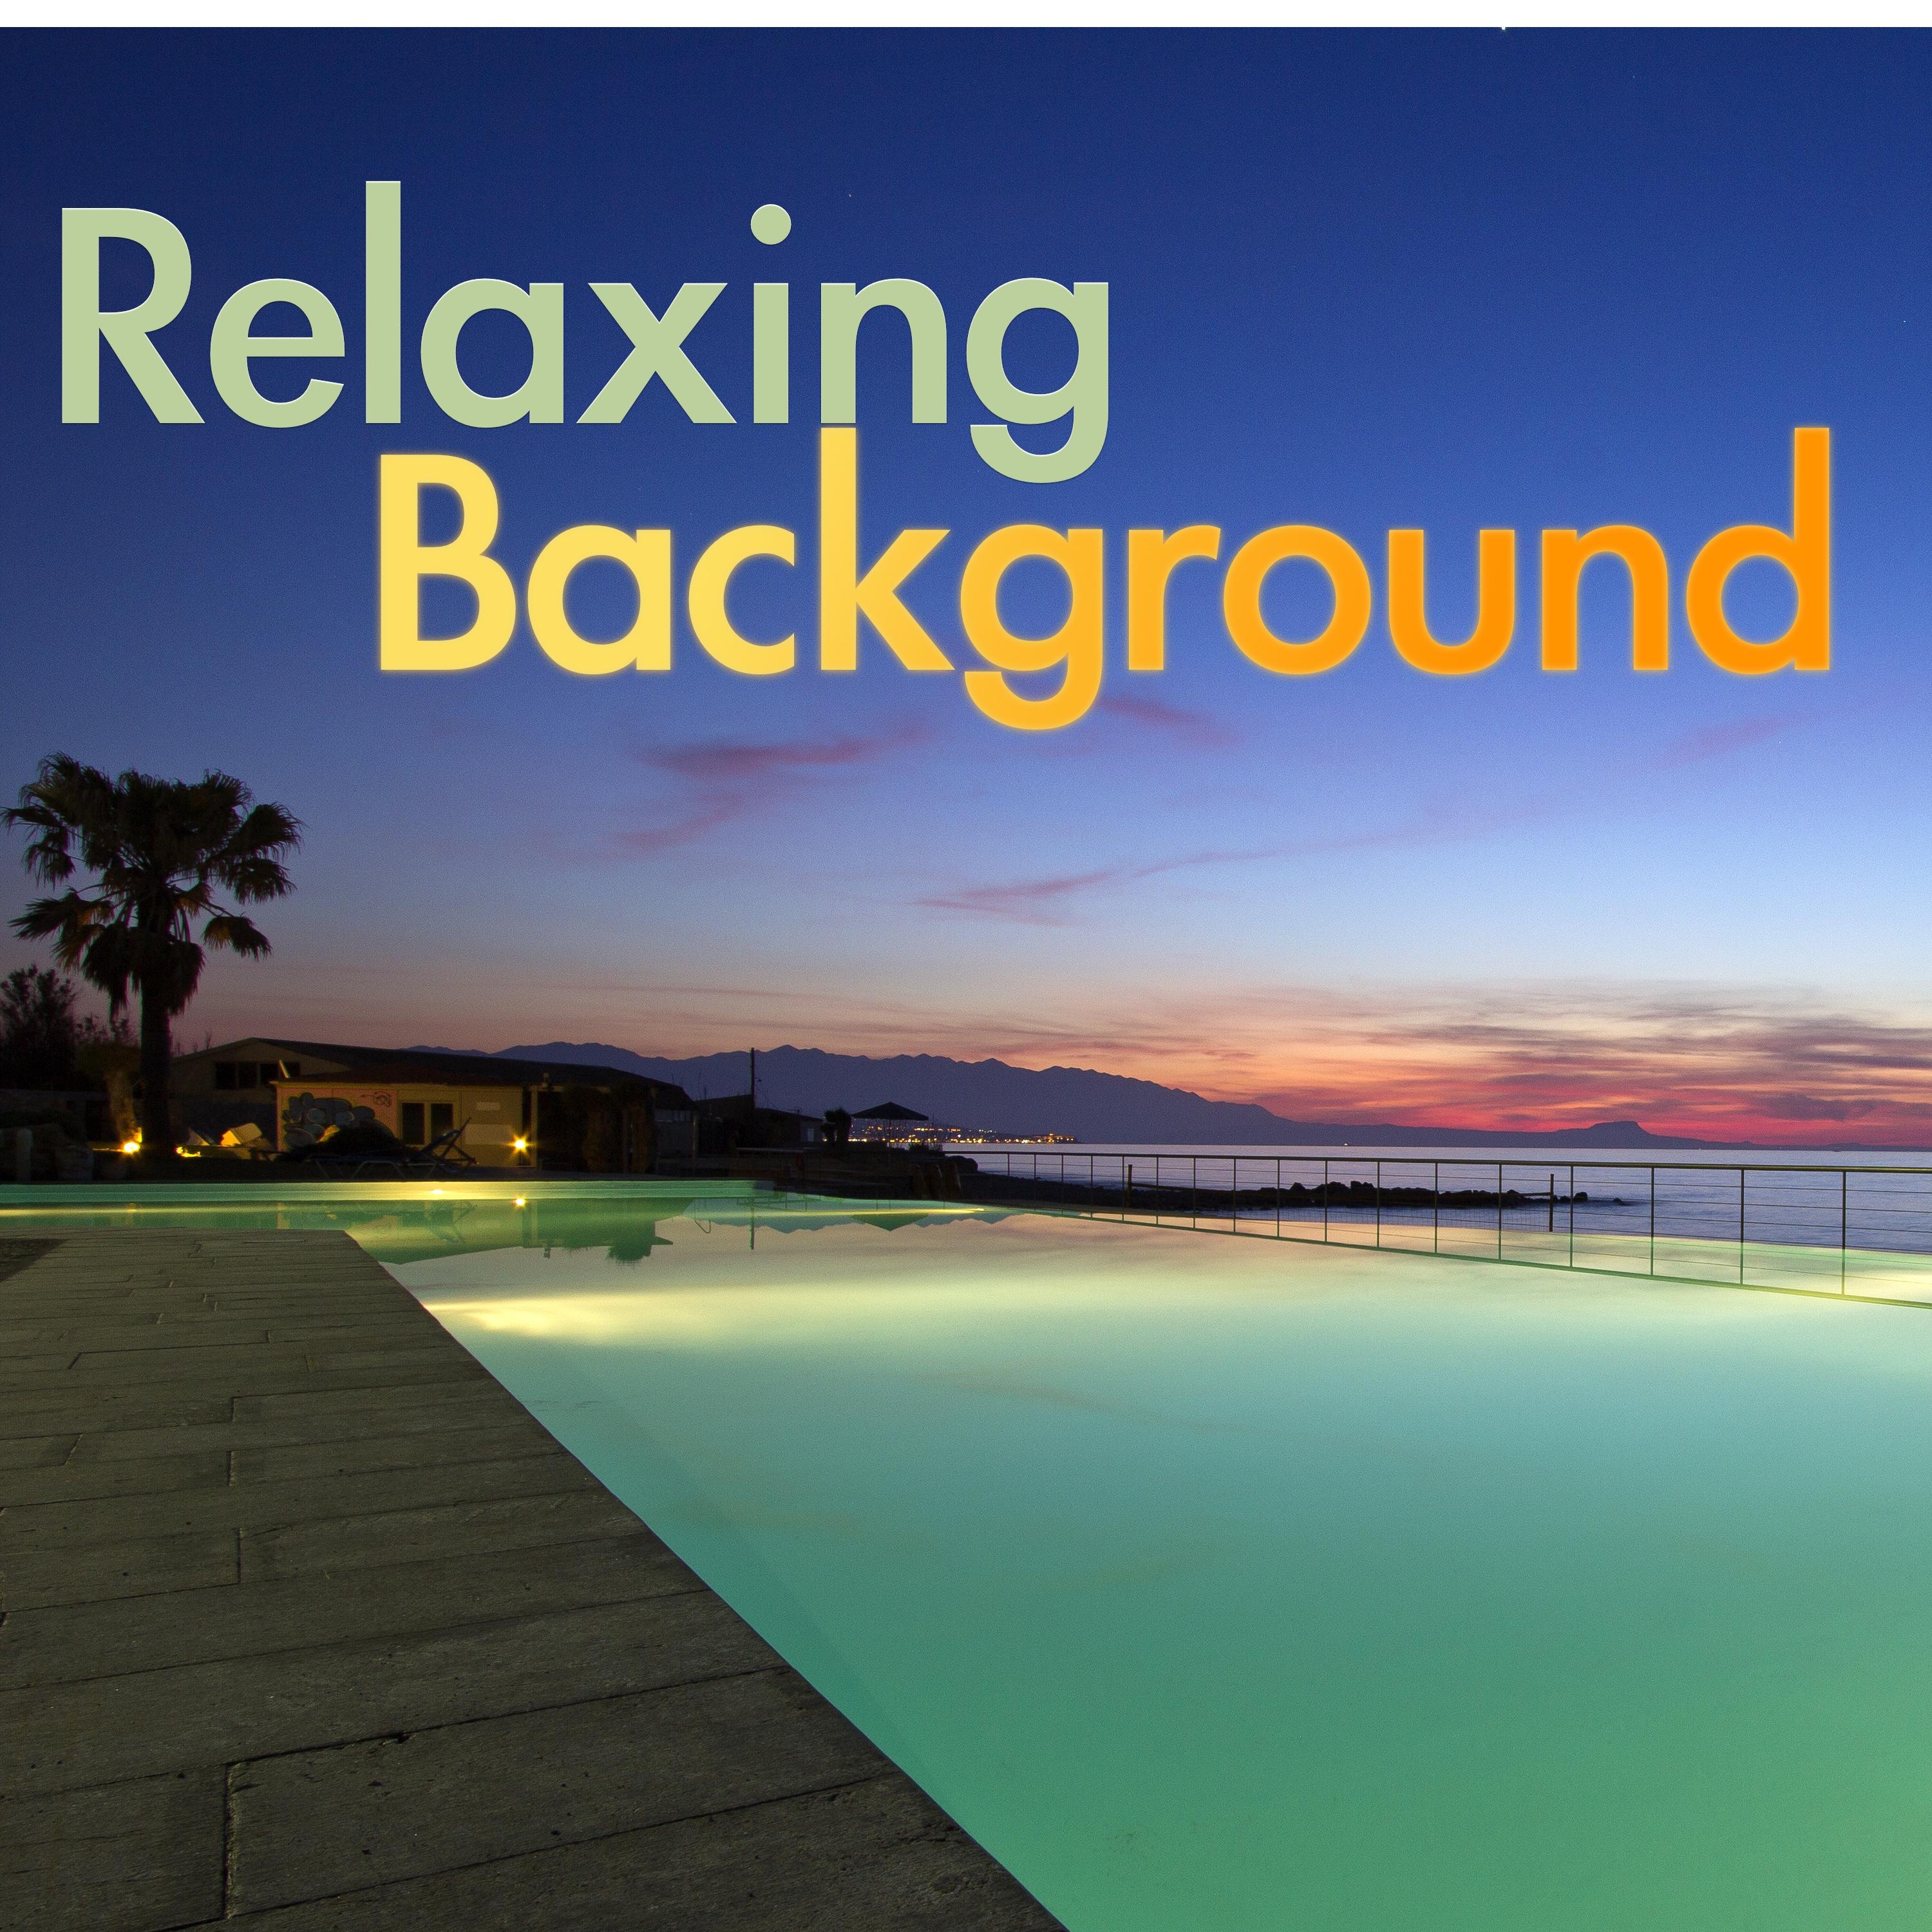 Relaxing Background Music Club: New Age Music for Total Relaxation, Office Music, Study Music, Waiting Music